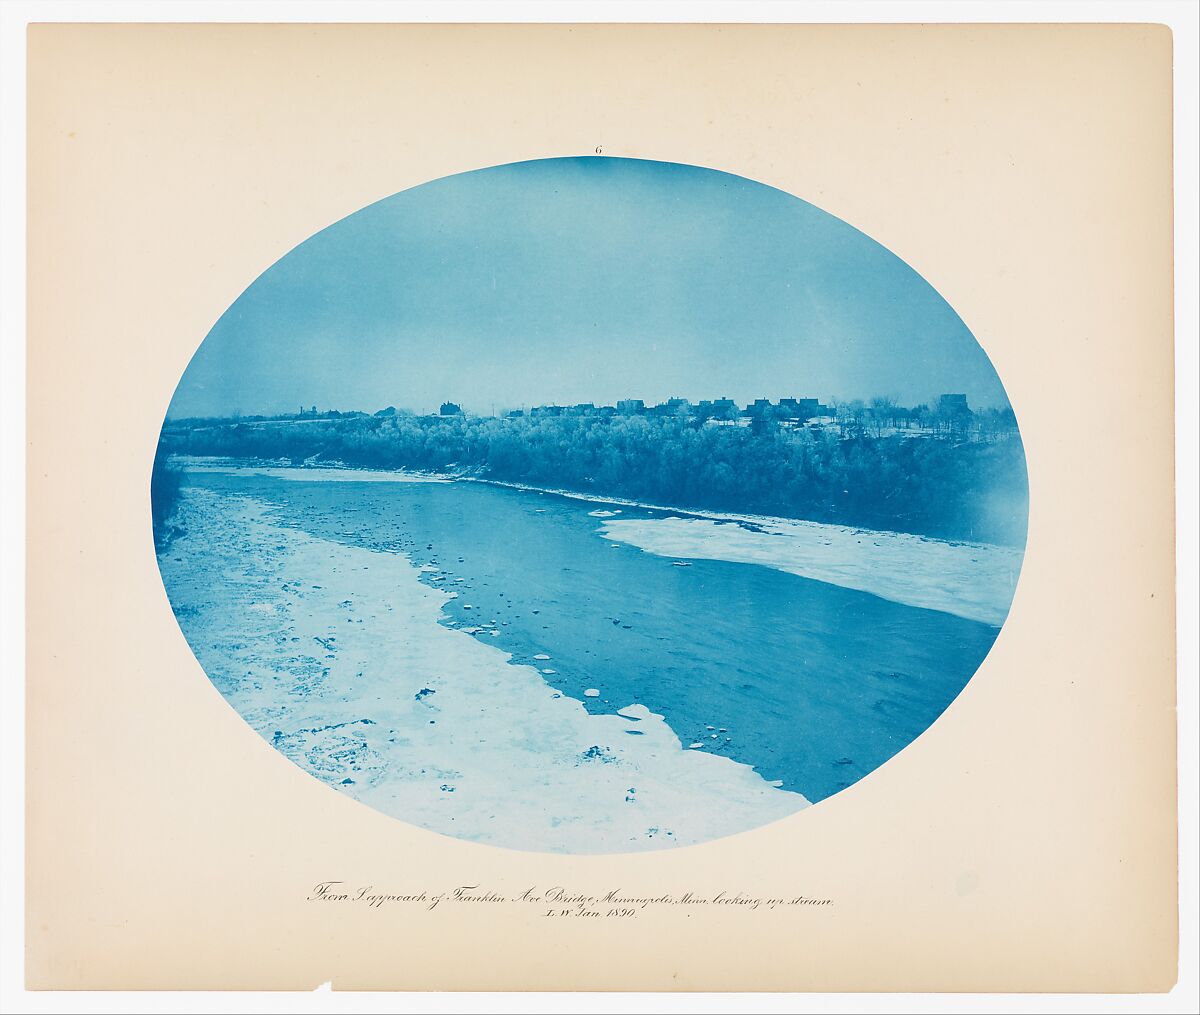 No. 6. From South Approach of Franklin Ave Bridge, Minneapolis, Minnesota Looking Up Stream (Low Water), Henry P. Bosse  American, born Germany, Cyanotype